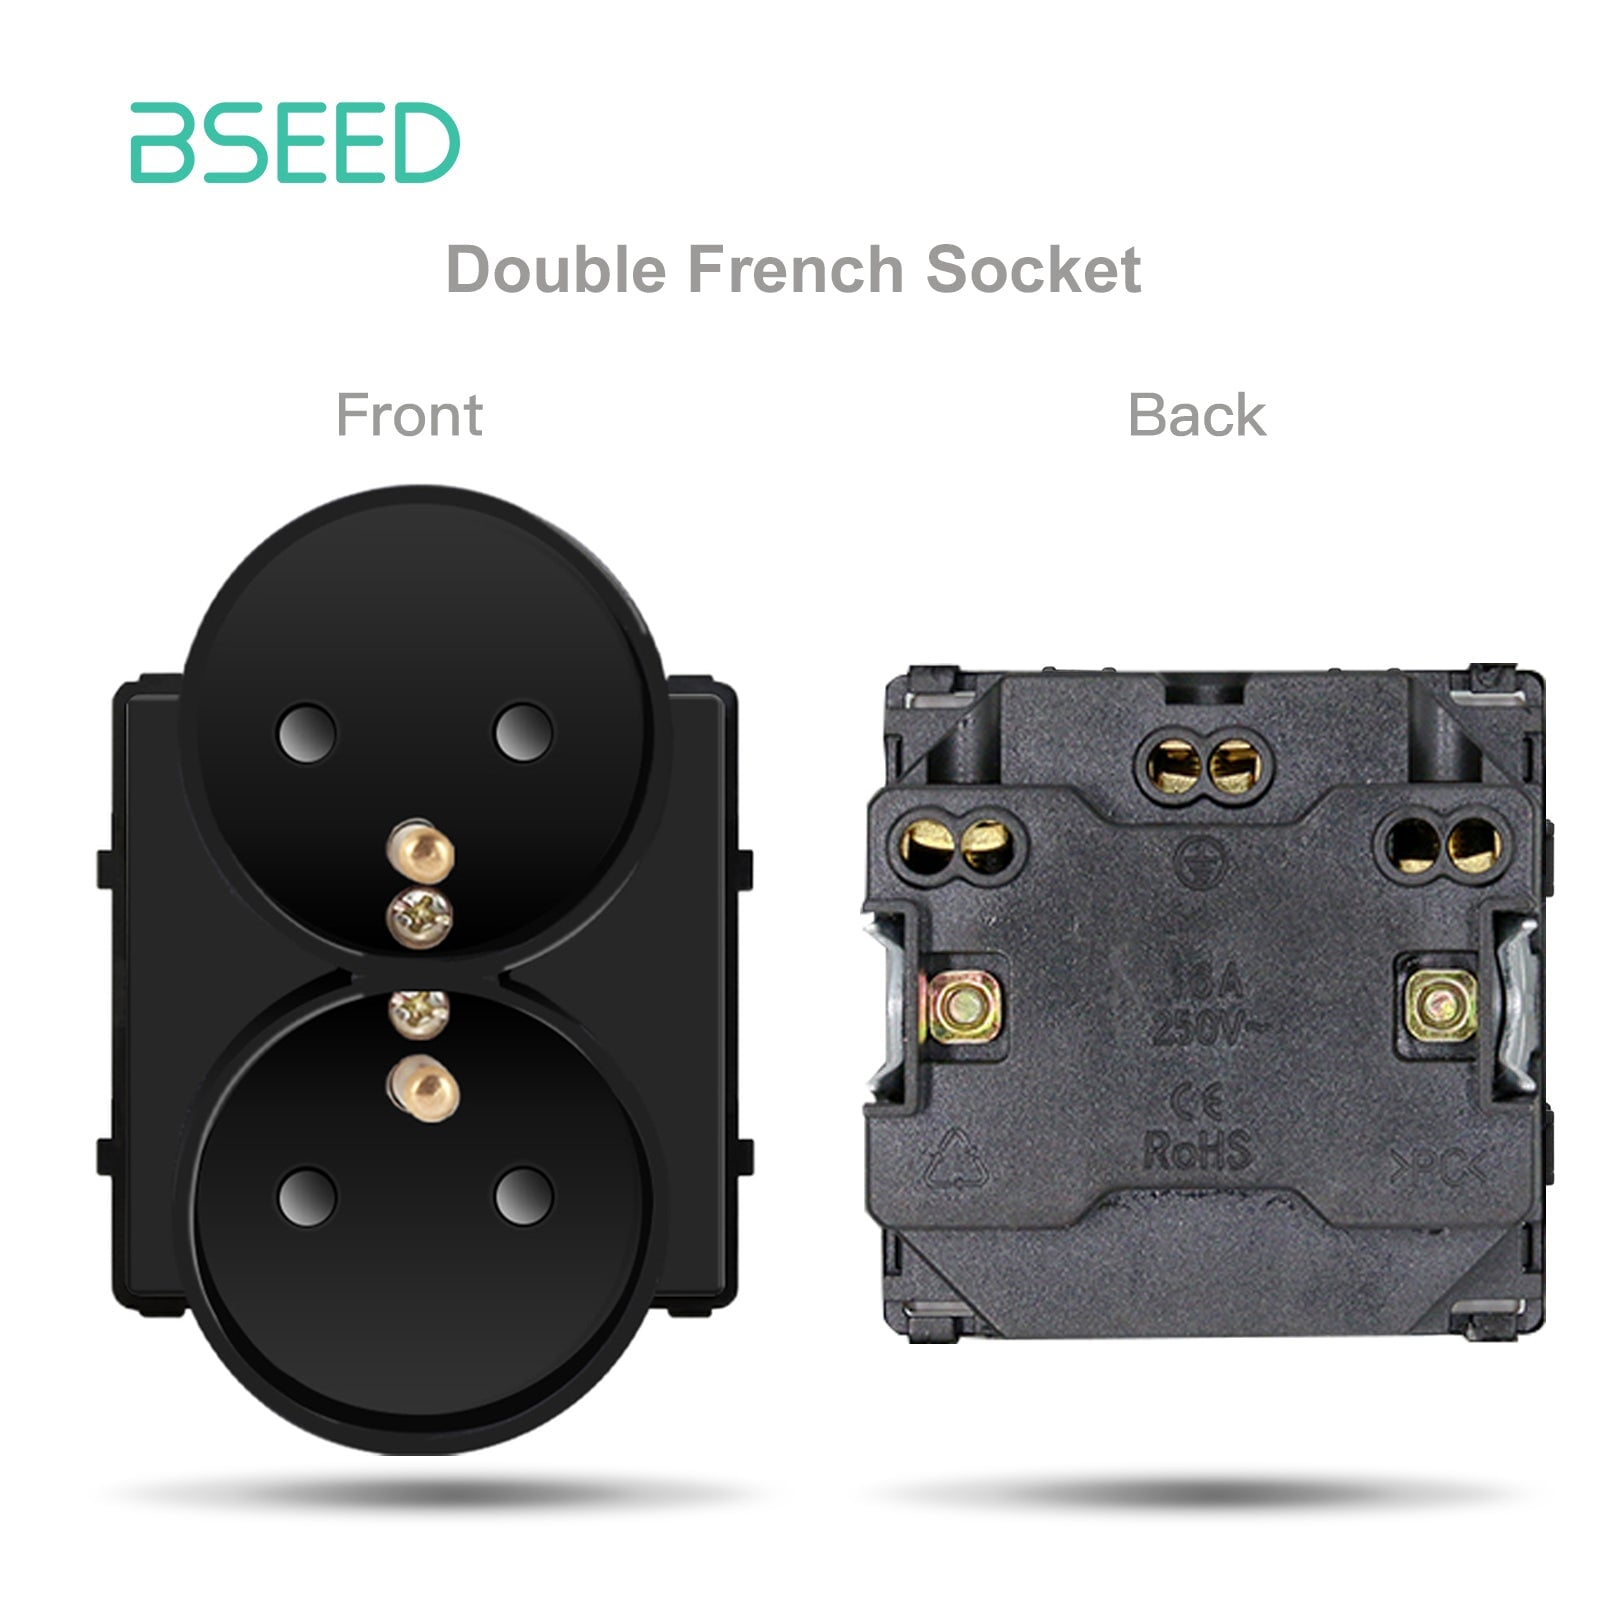 BSEED EU/FR Standard double Wall Socket Function Key without panel DIY part Power Outlets & Sockets Bseedswitch Black FR 